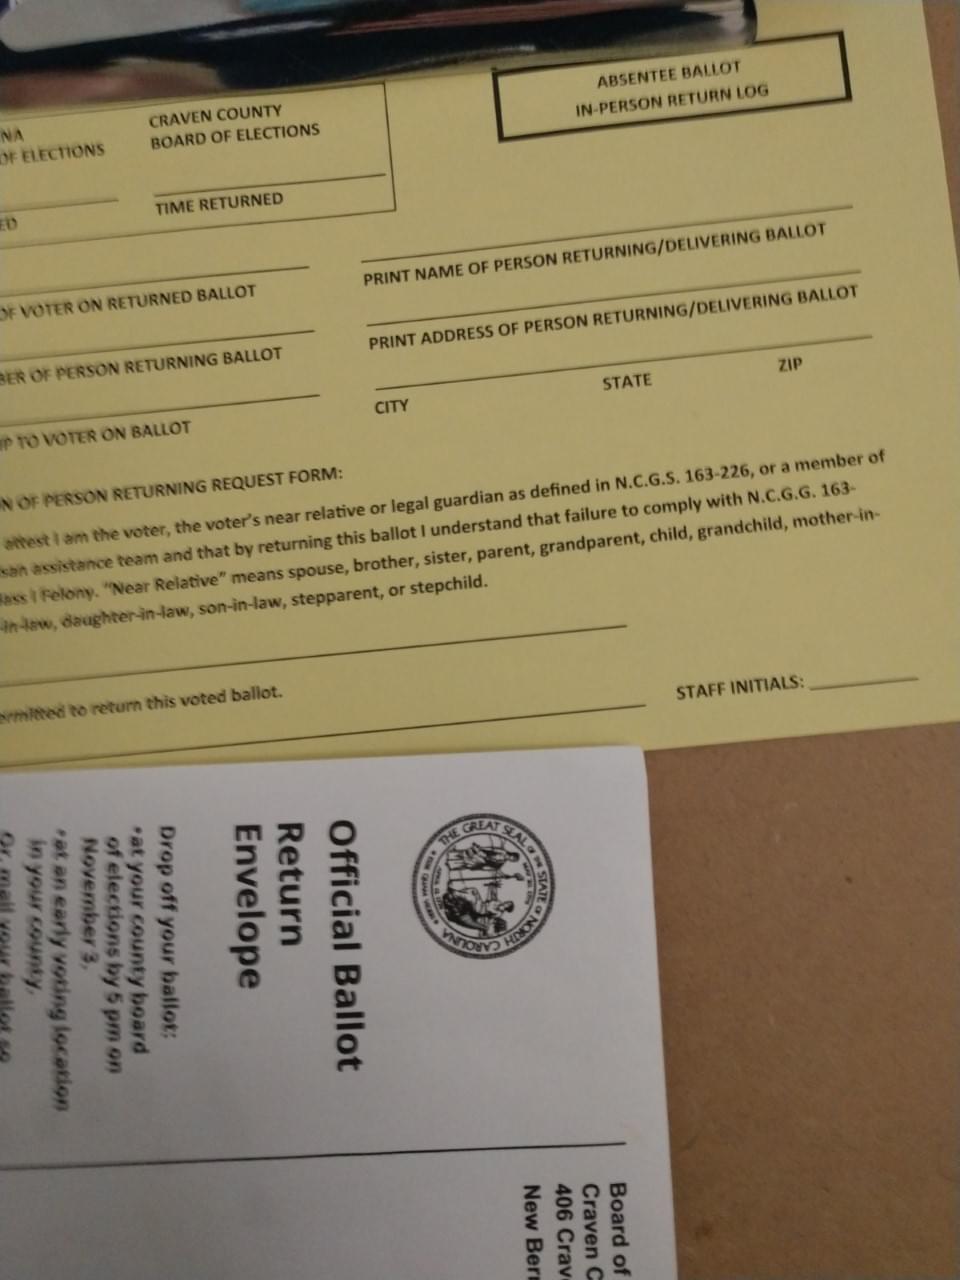 Dropping Off Your Absentee Ballot at the Craven County Board of Elections